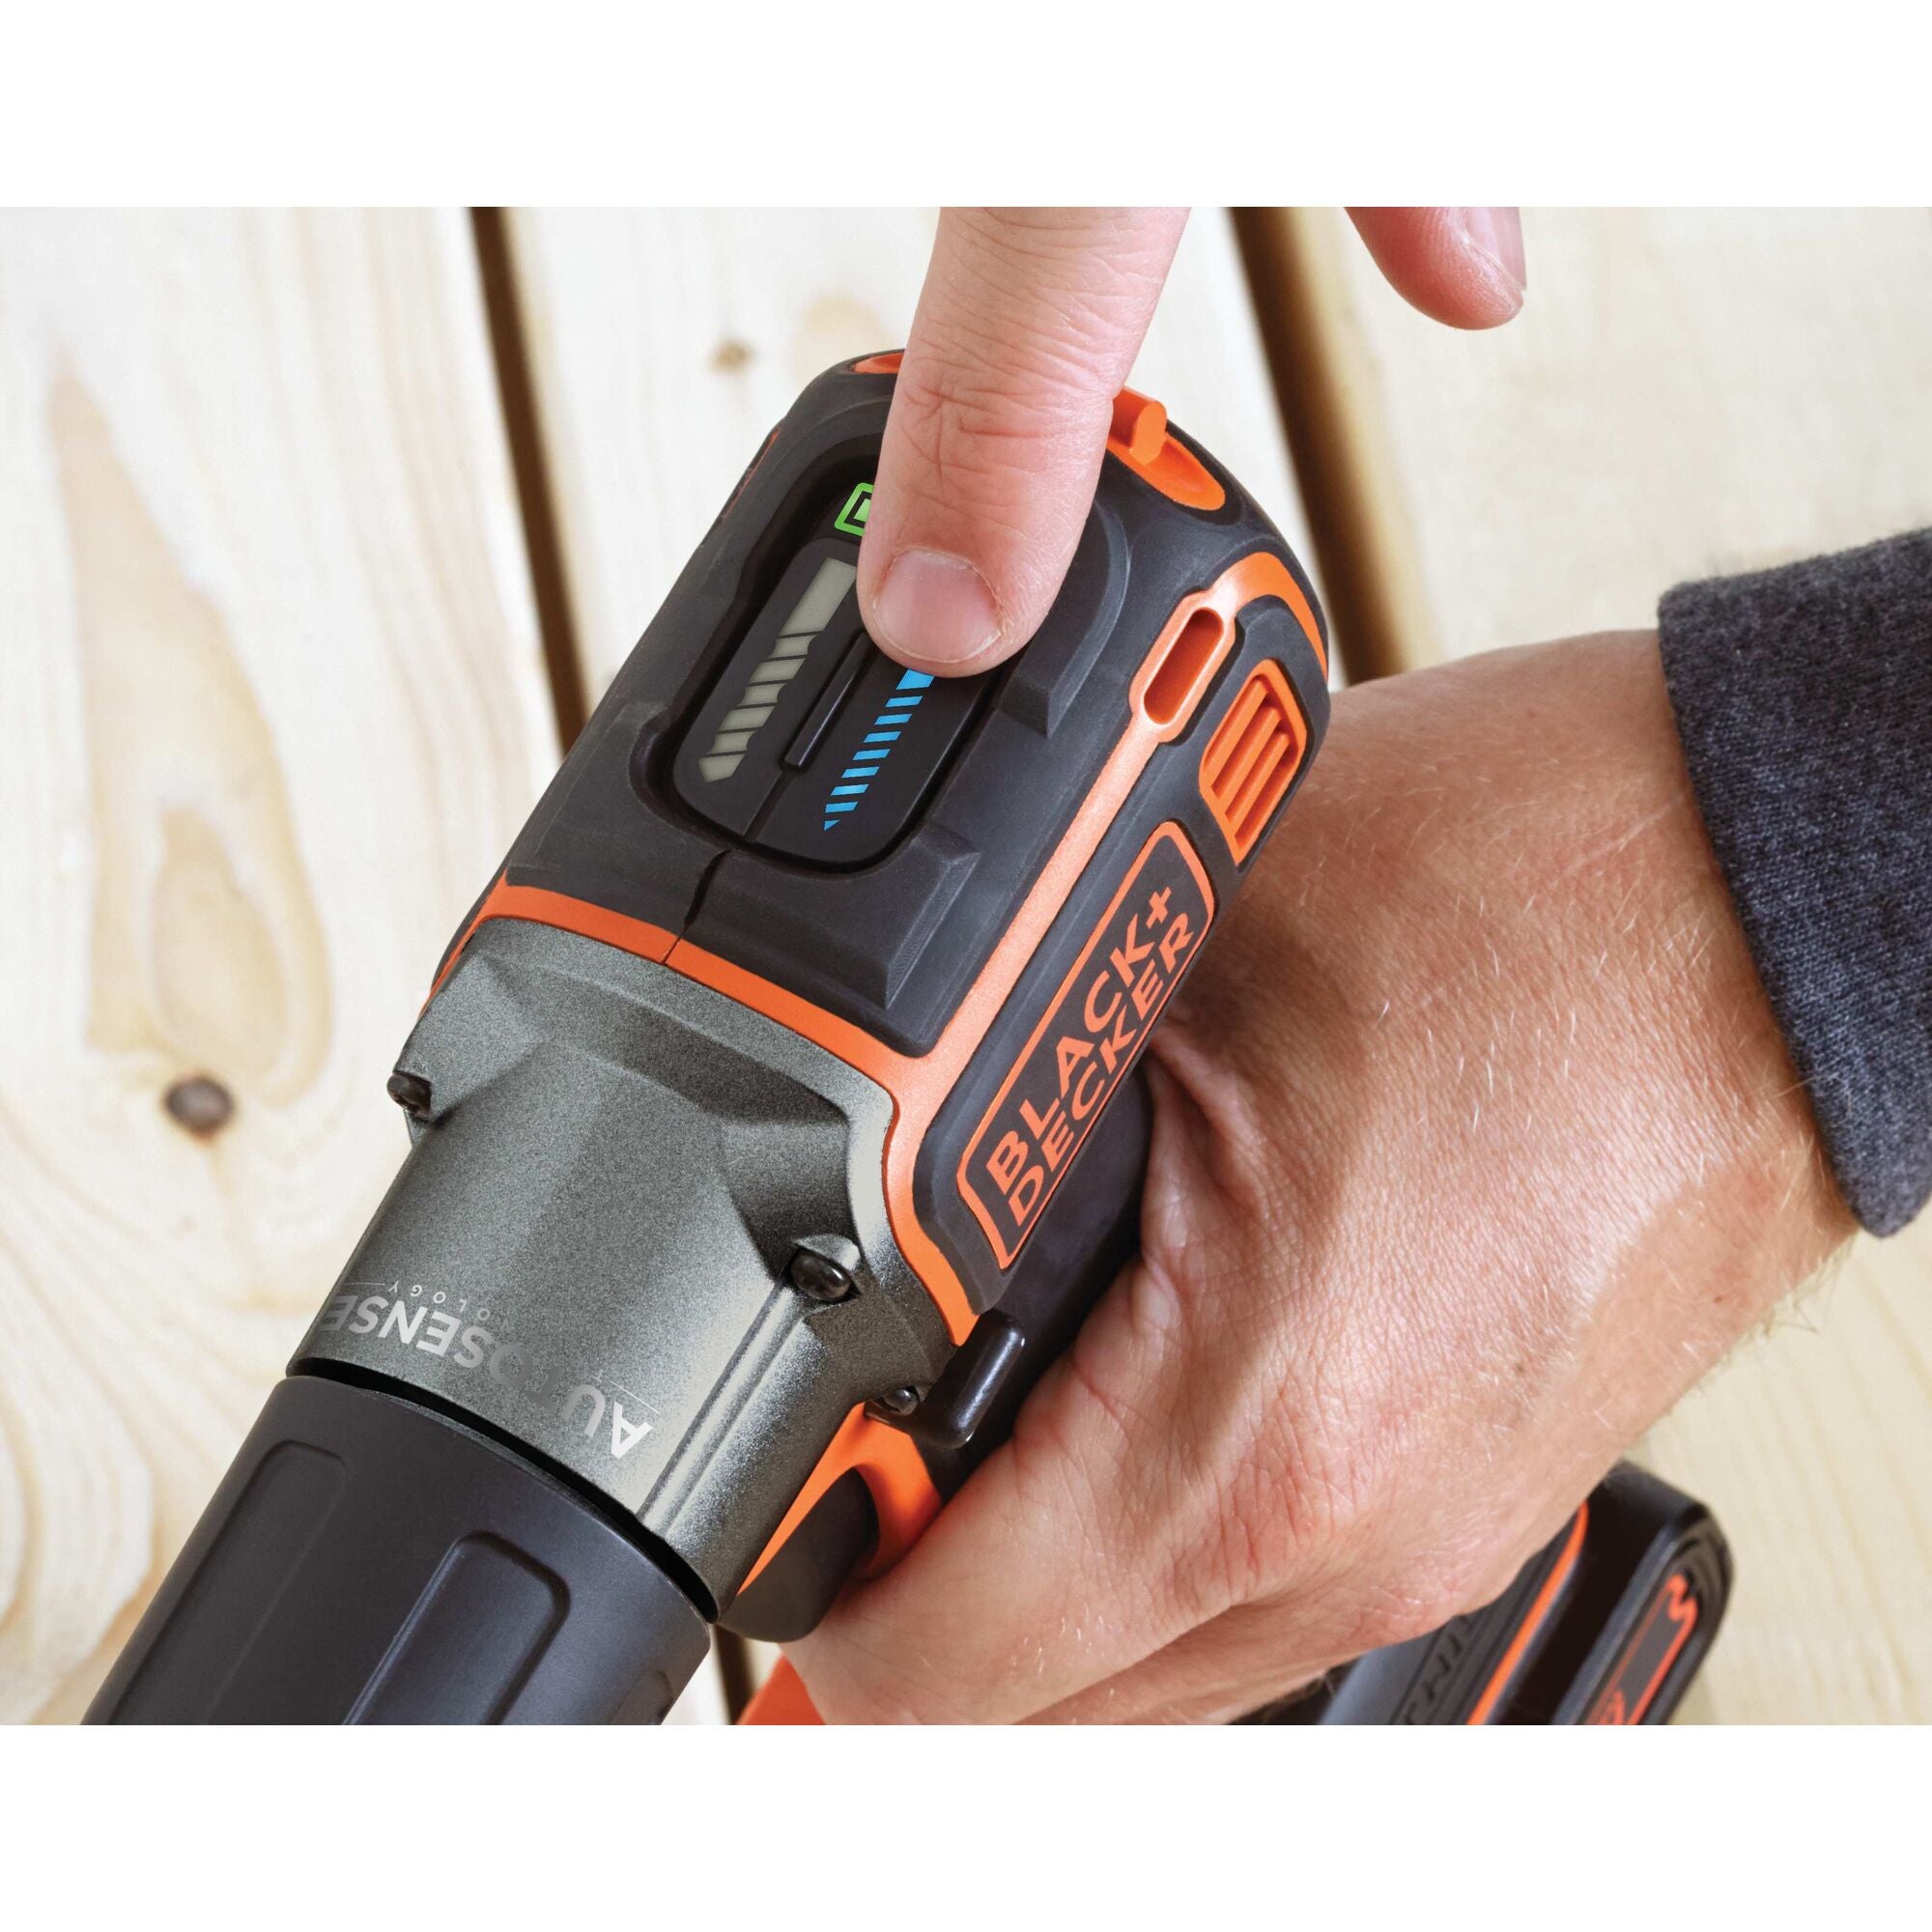 20V Max Powerconnect 3/8 In. Cordless Drill/Driver With Autosense